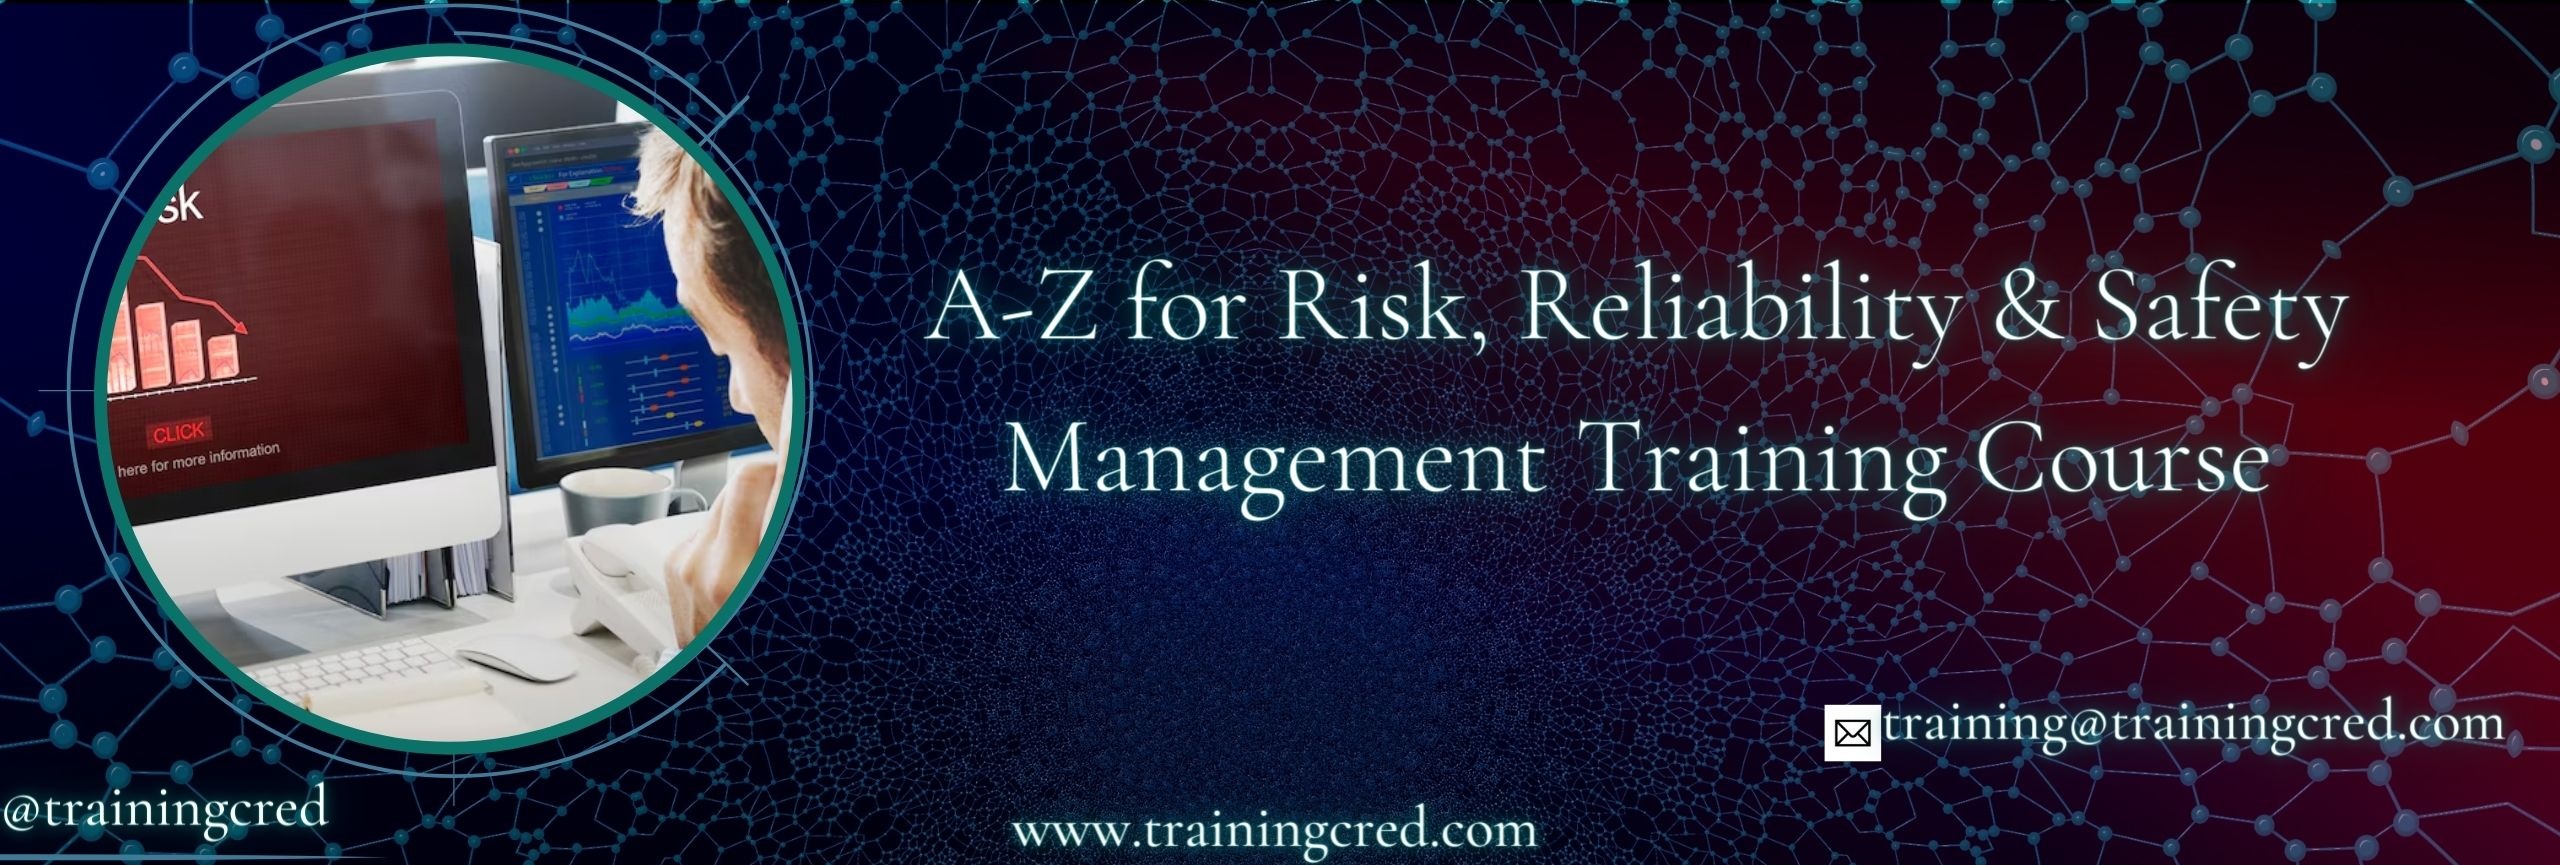 A-Z for Risk, Reliability and Safety Management Training